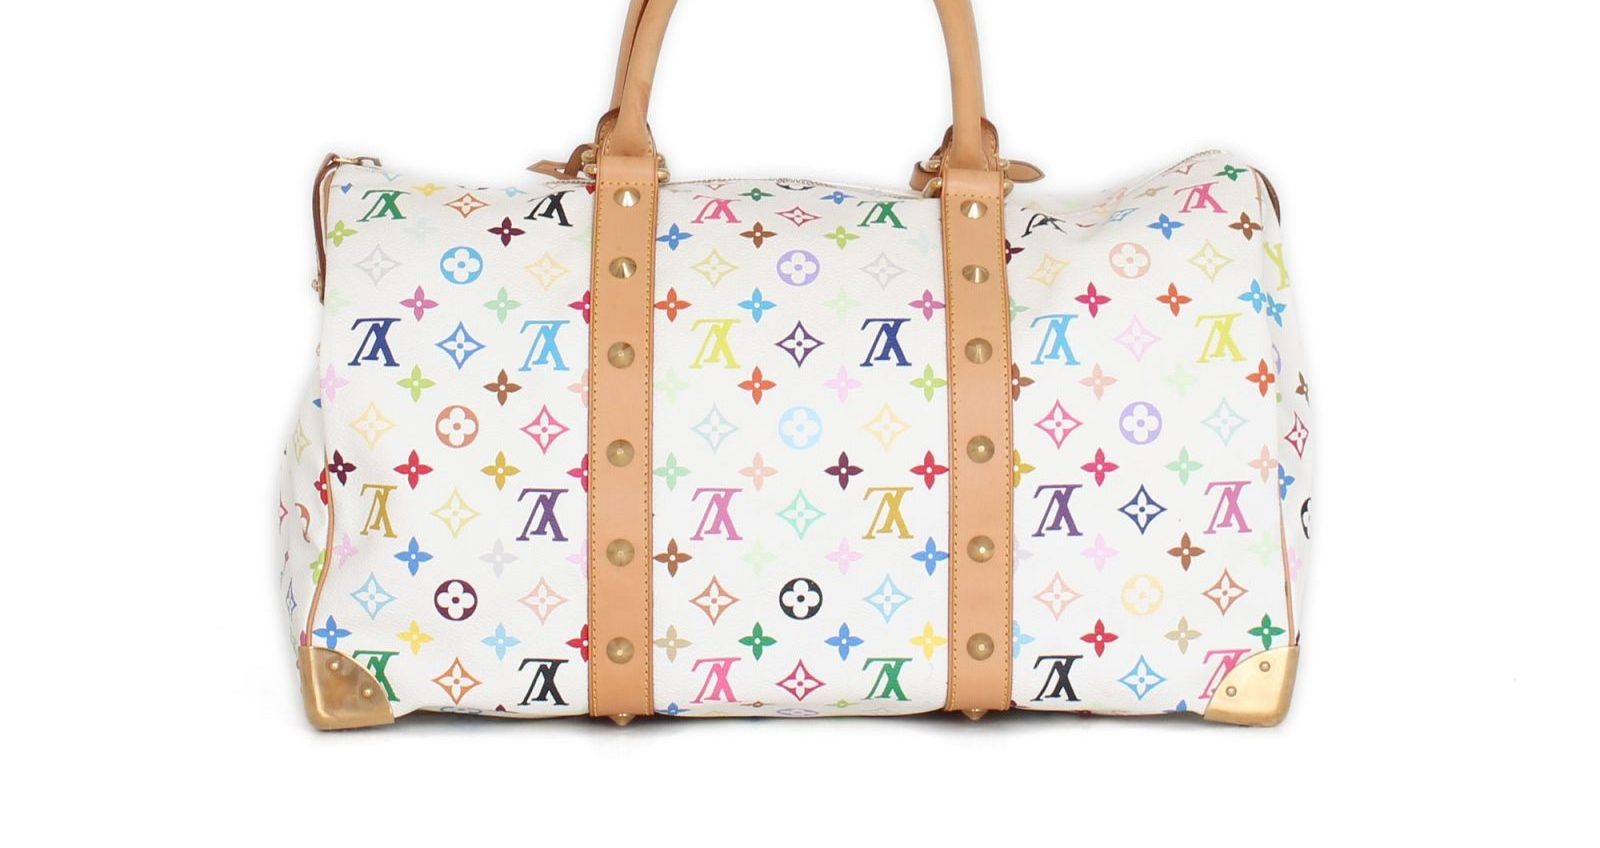 Remember Louis Vuitton's Foray Into the Sale of Counterfeits